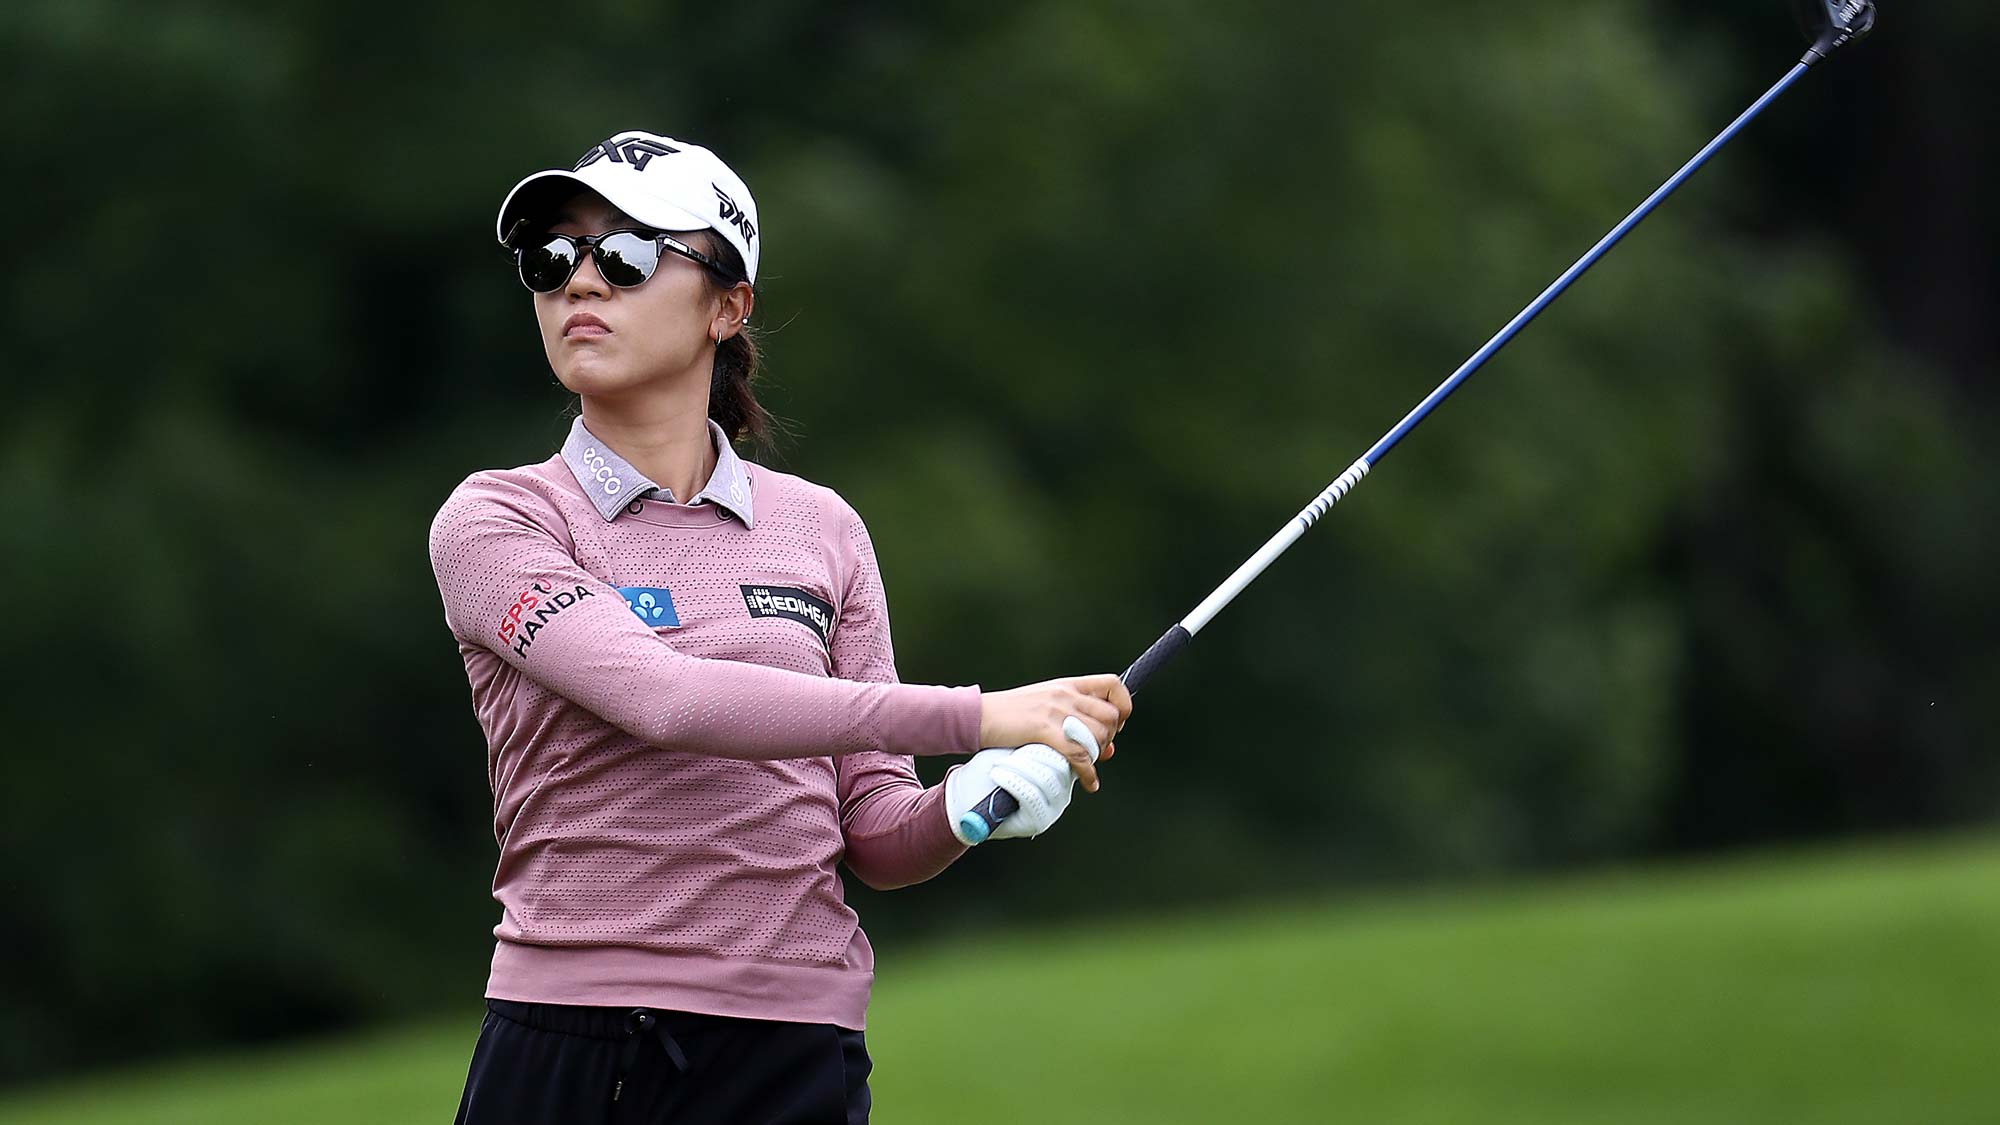 Lydia Ko of New Zealand hits her first shot on the 15th hole during the first round of the KPMG Women's PGA Championship